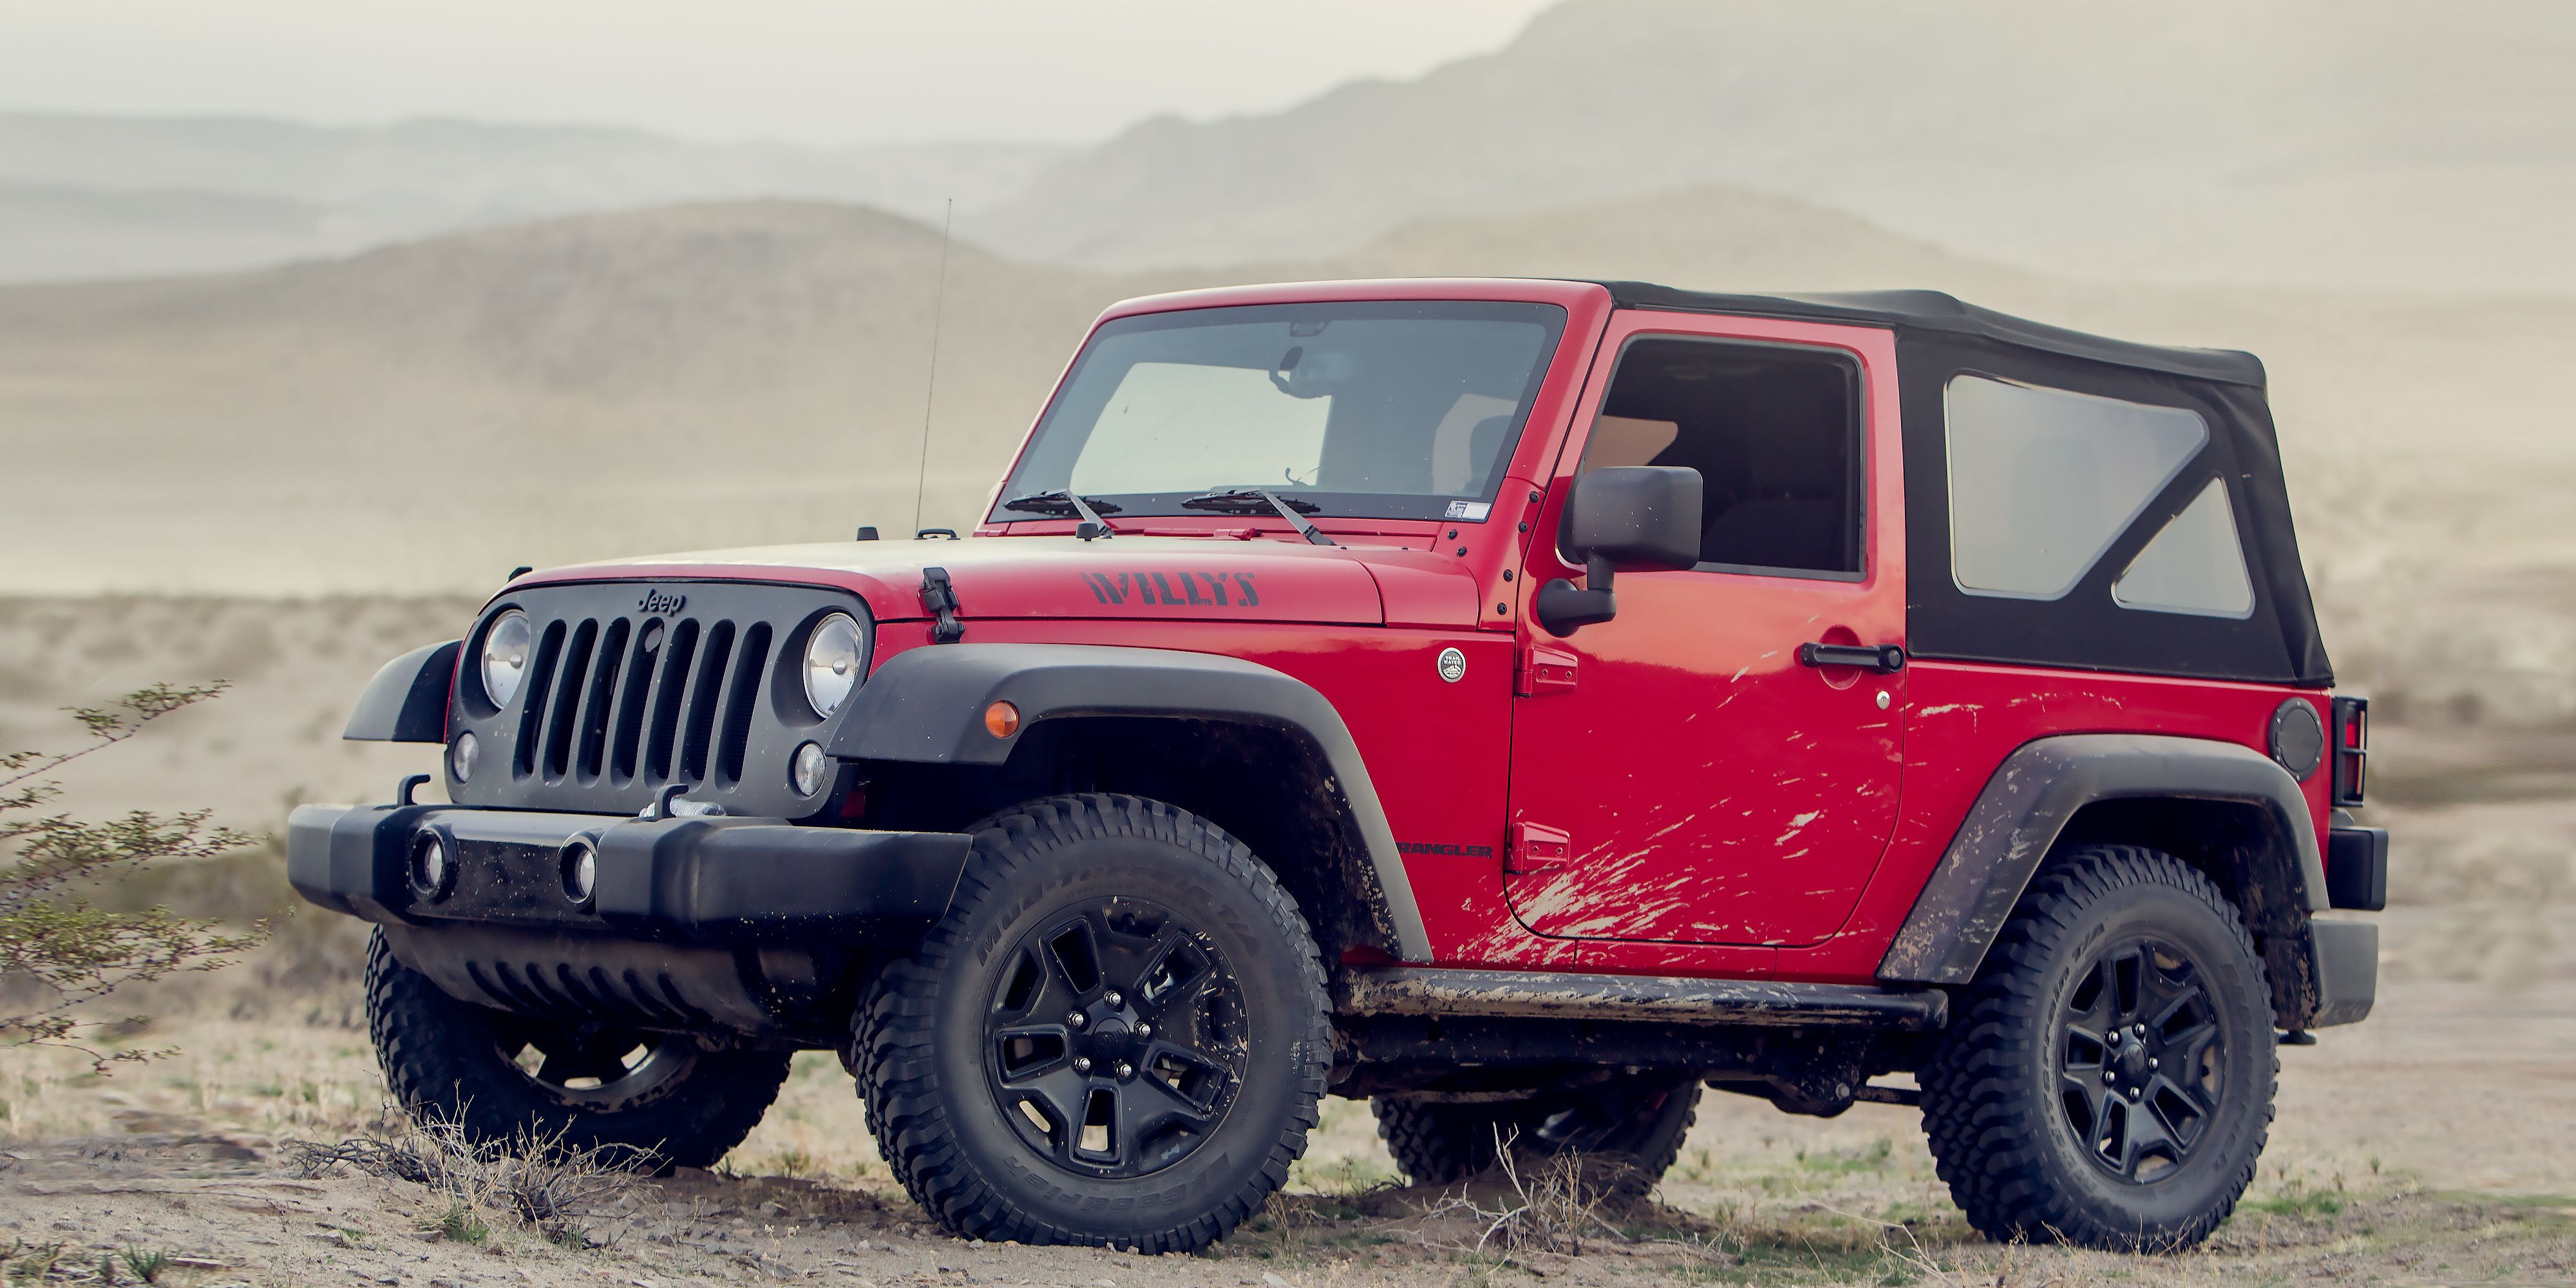 2017 Jeep Wrangler Could Get a 300-Horsepower Turbo Four-Cylinder